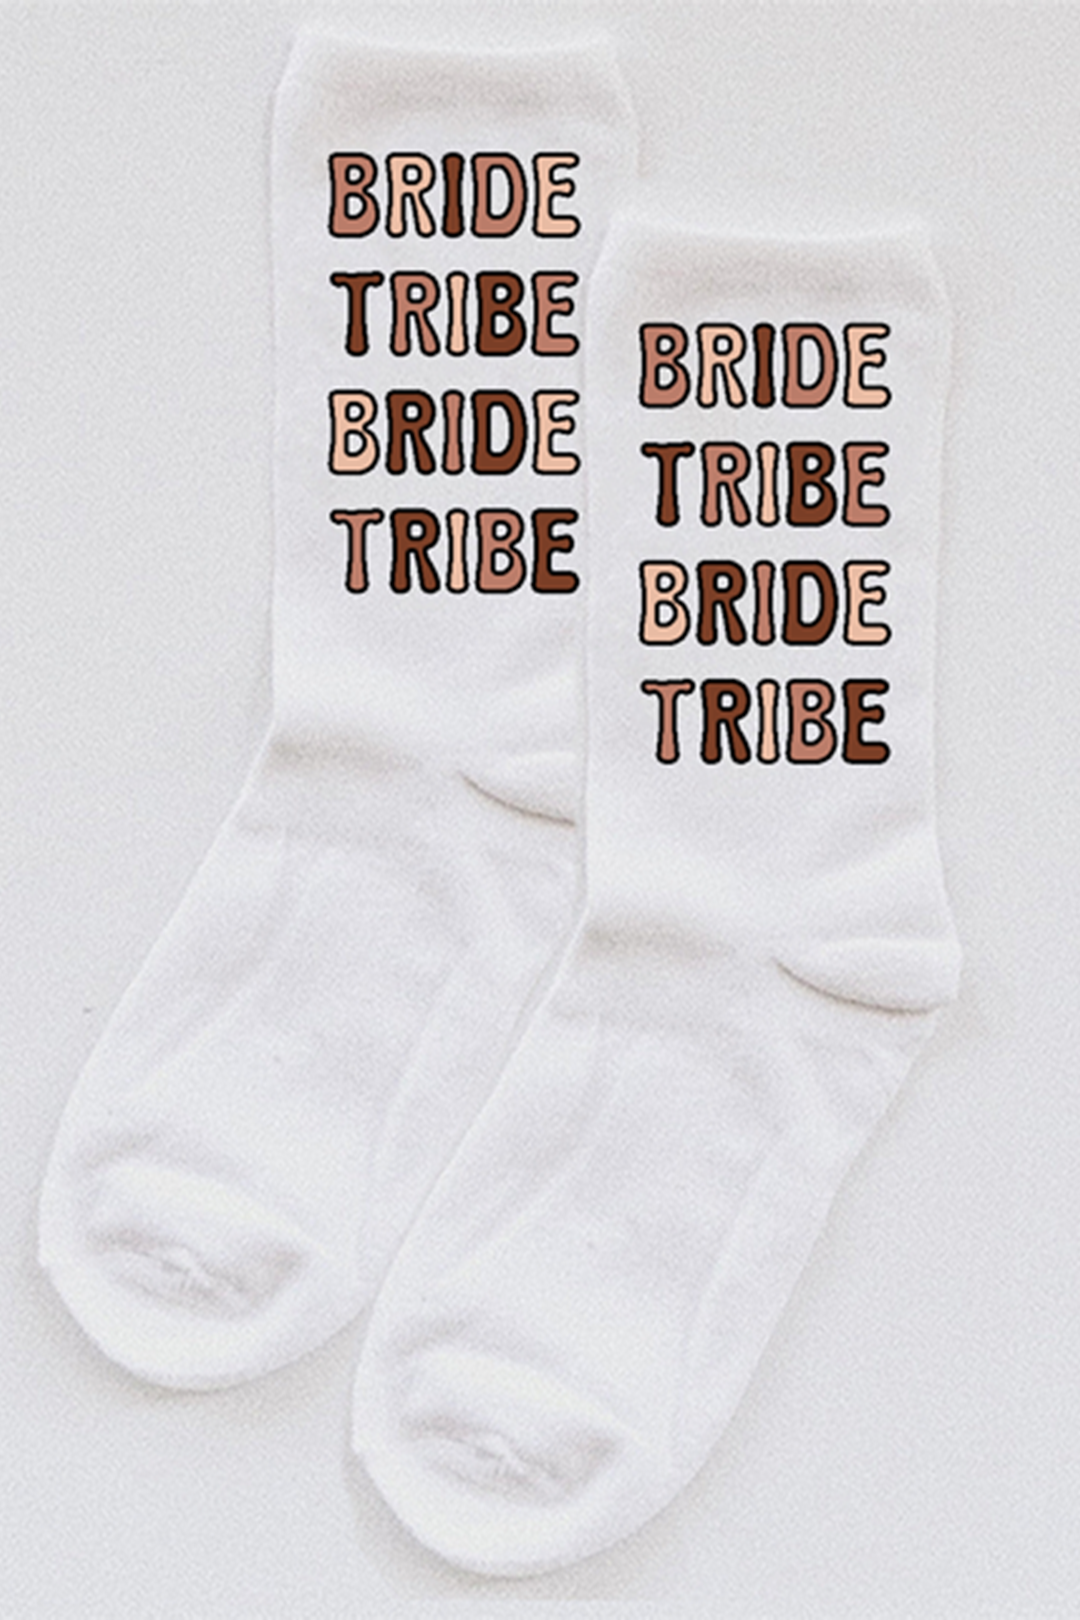 Bride Tribe Bubble Letter socks - choose your colors! – Spikes and